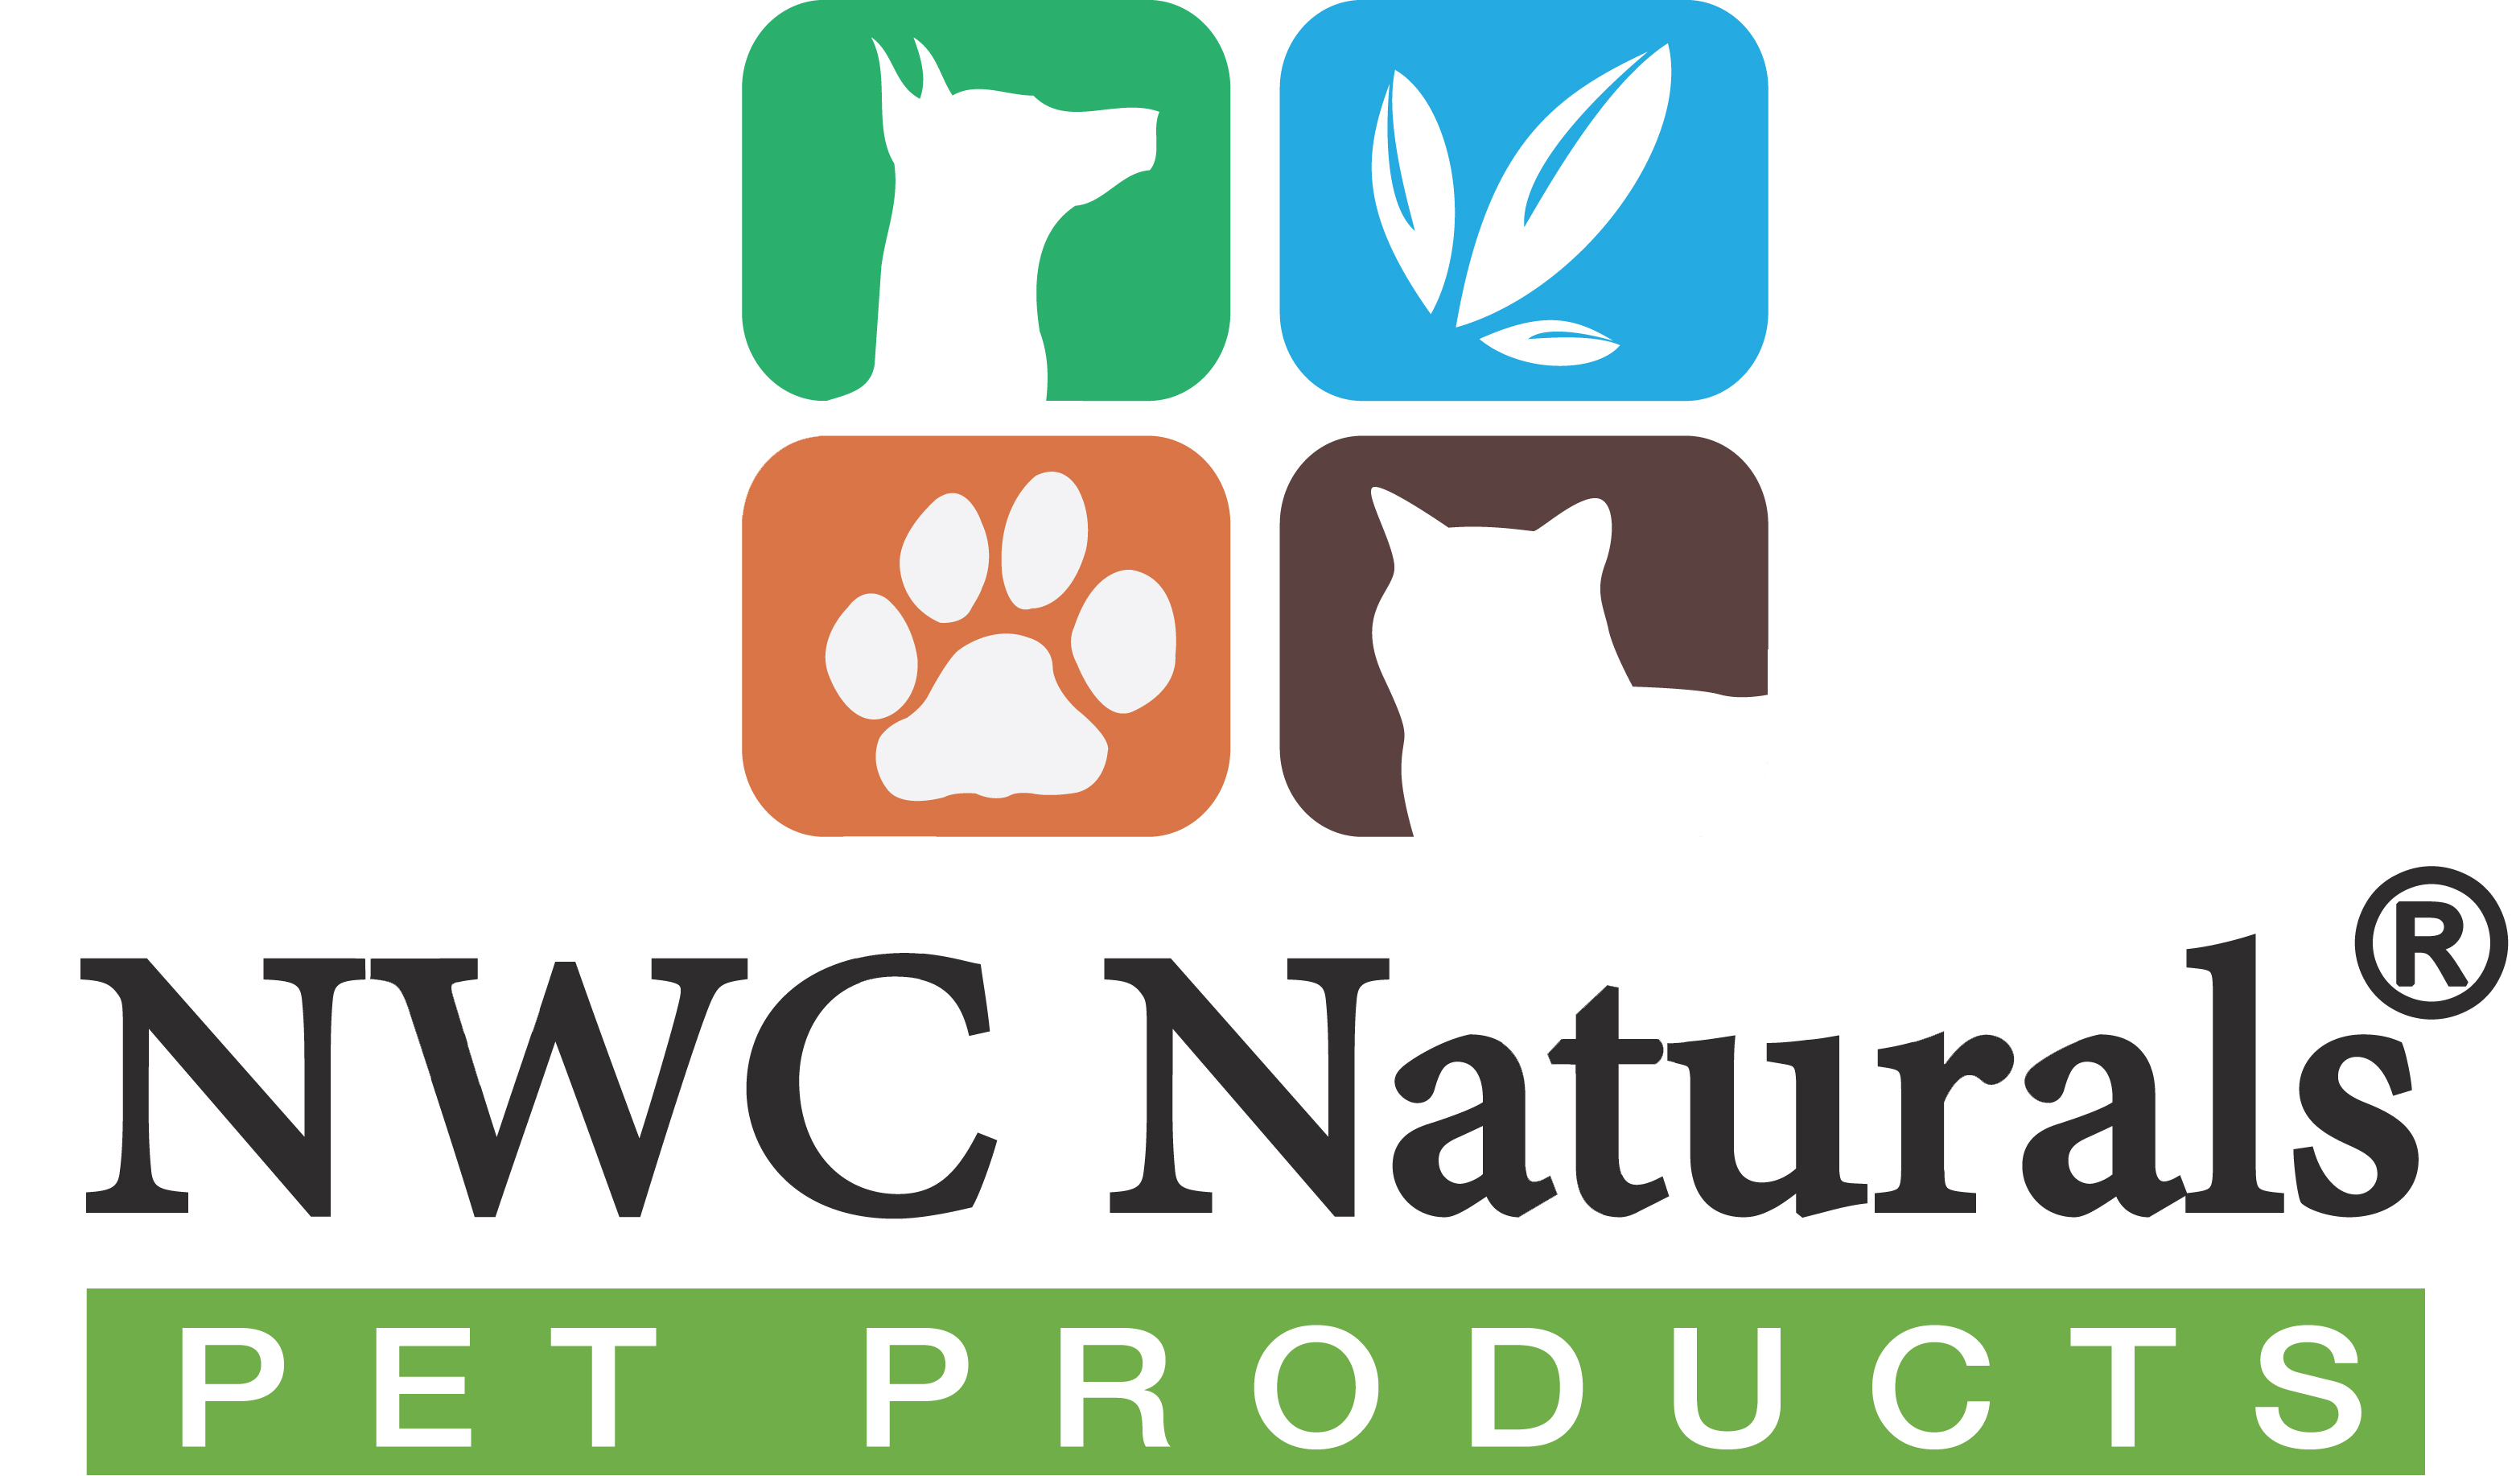 nwc naturals pet products